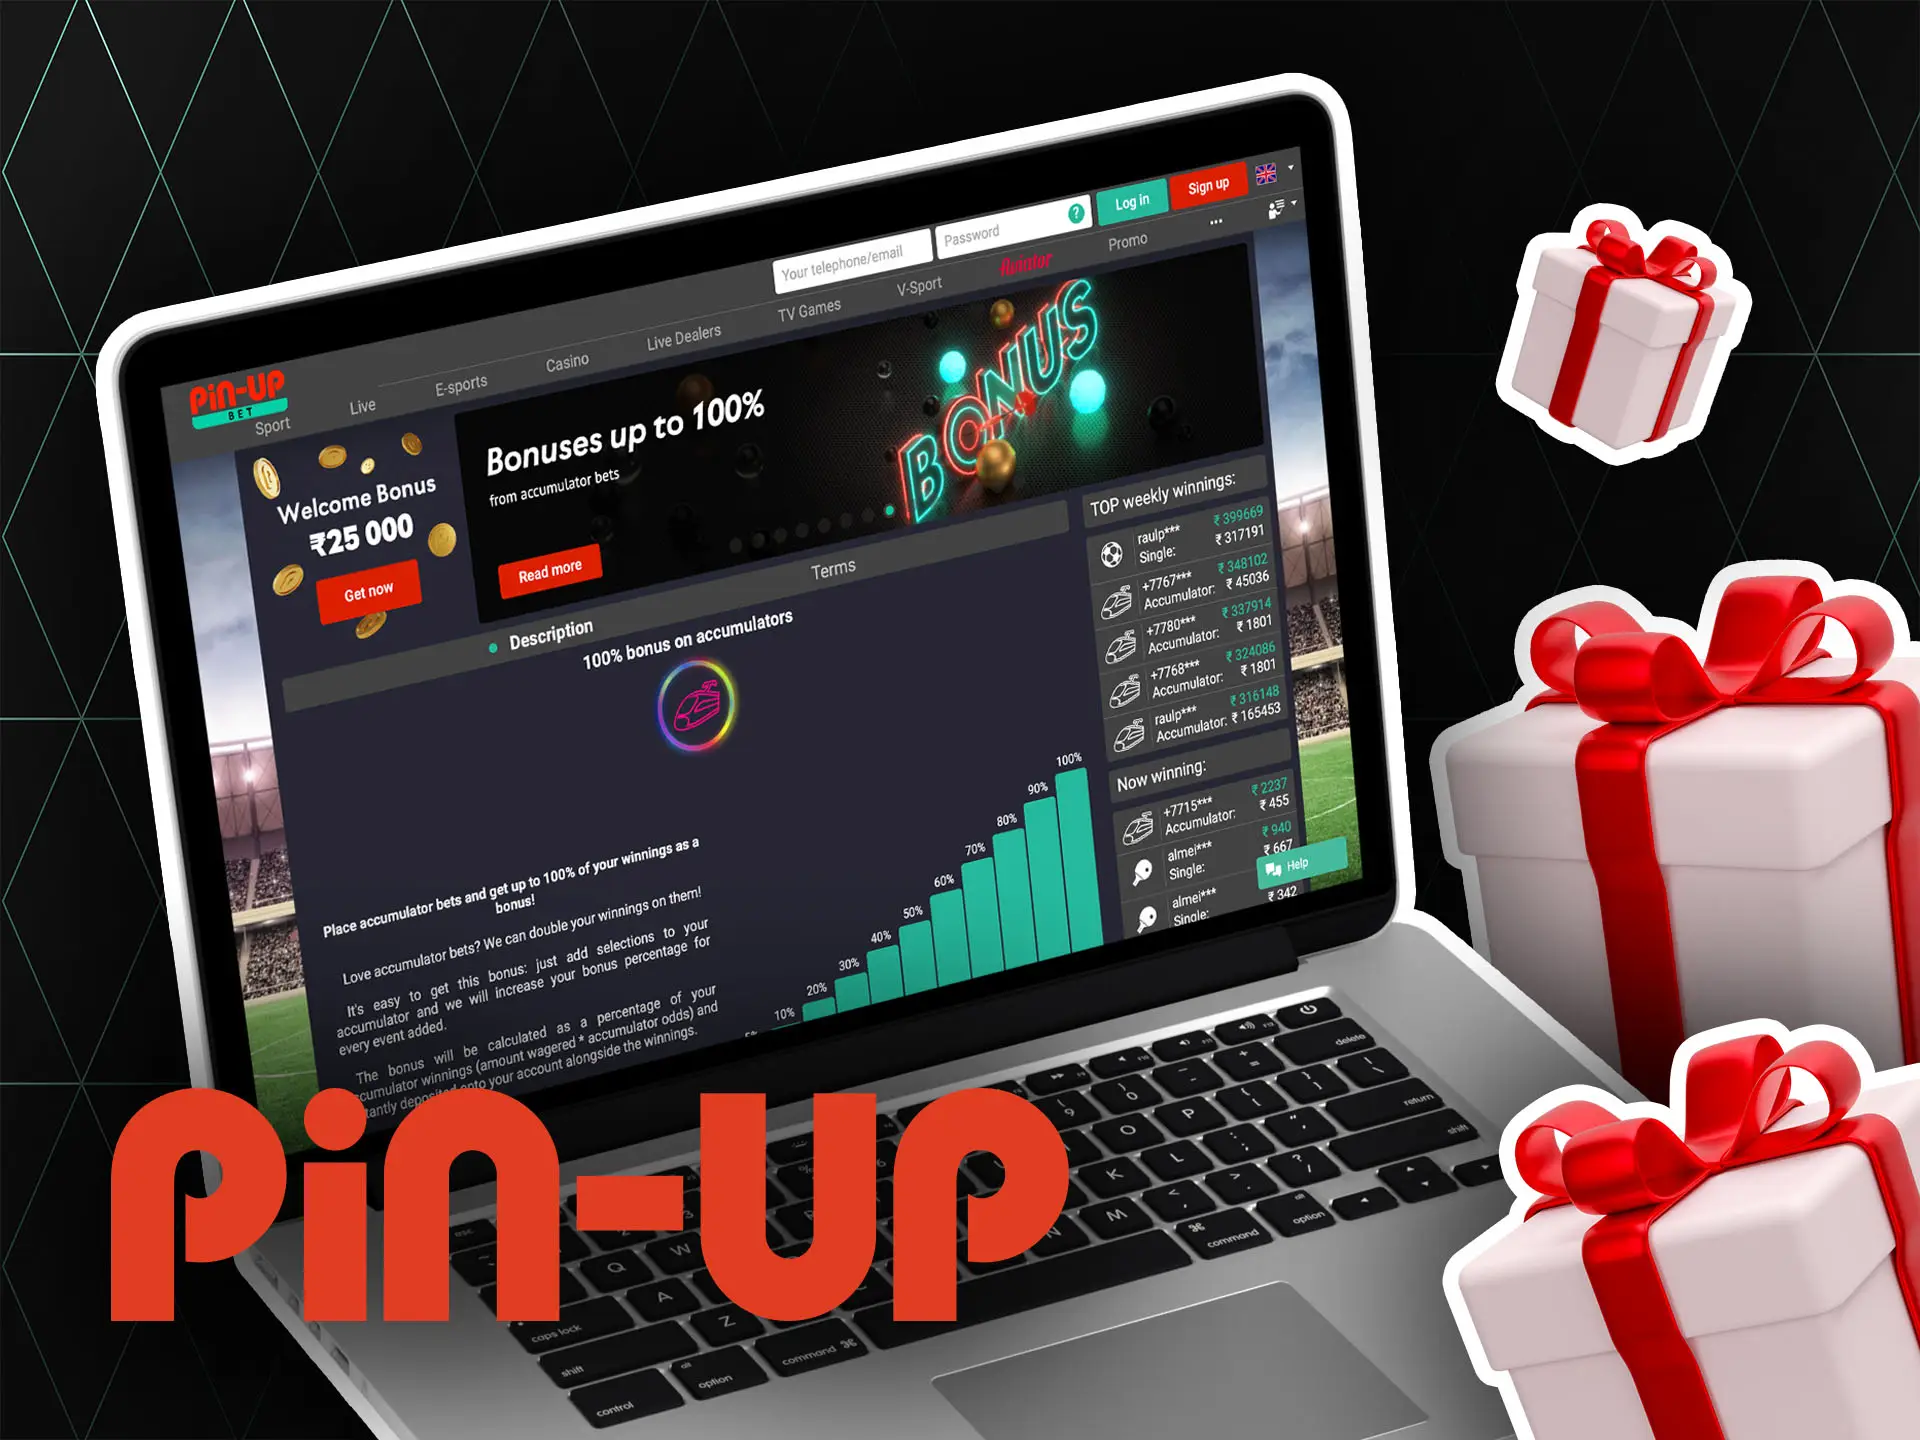 Place more than 20 events in your accumulator bet to get a 100% bonus.